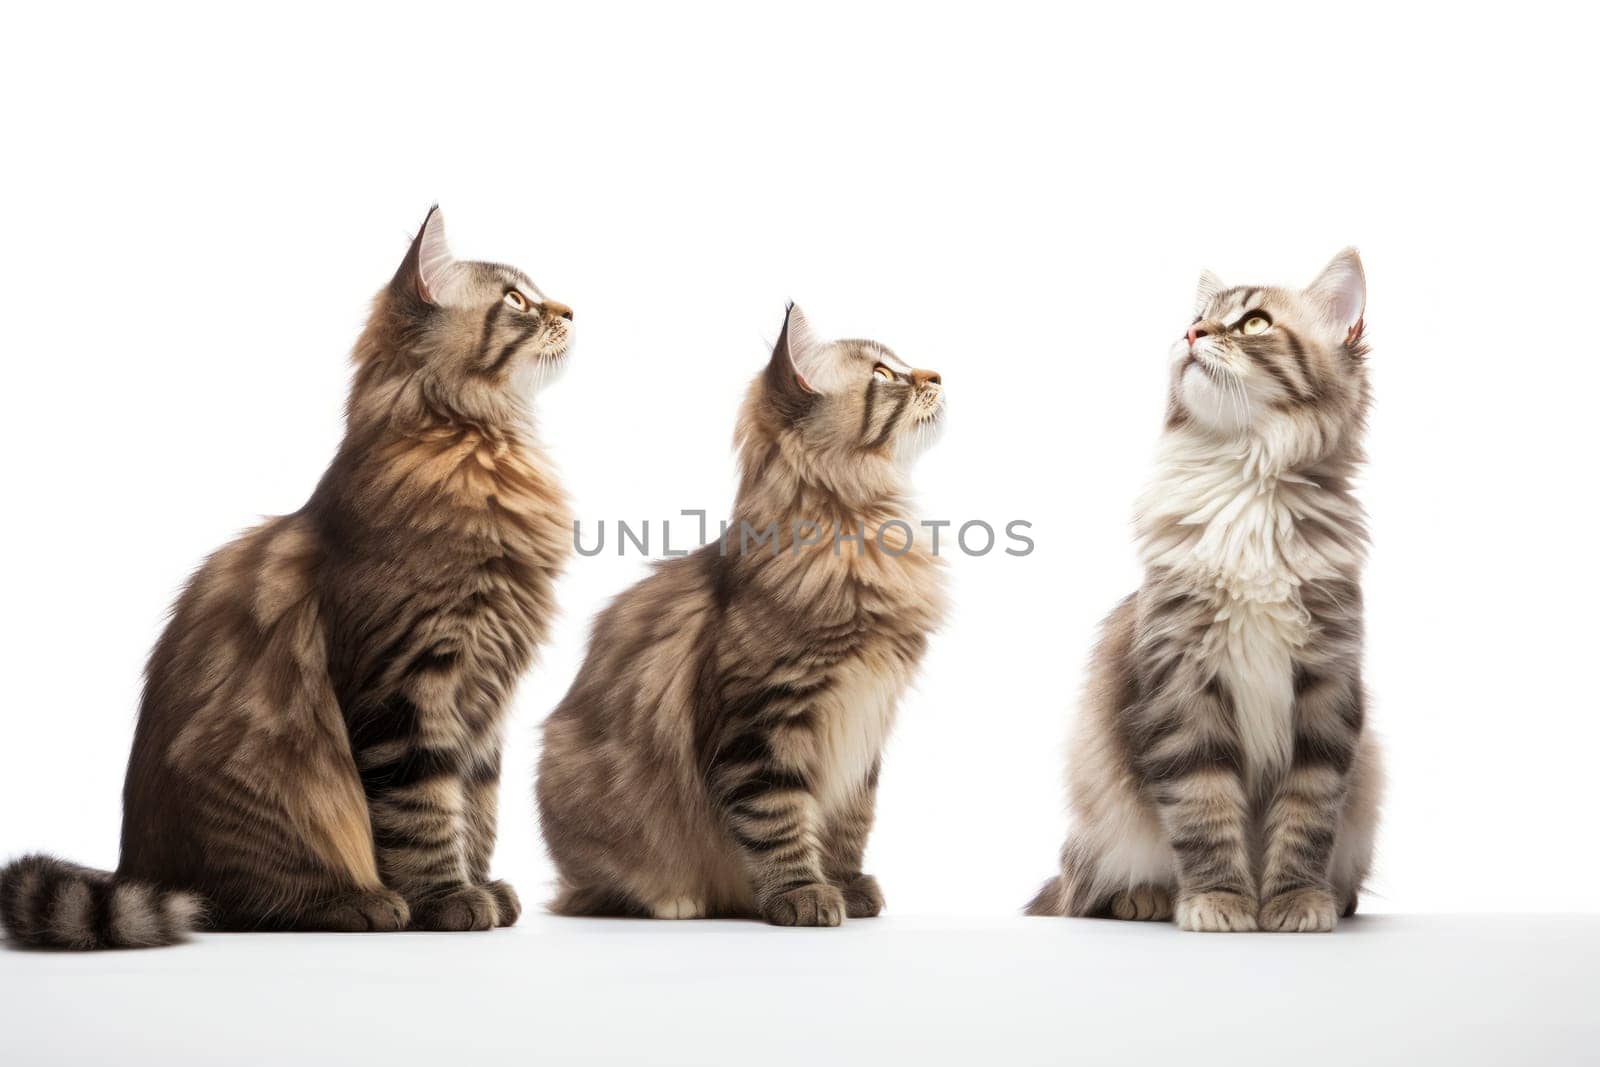 Three Maine Coon cats sitting and looking up, isolated on a white background.